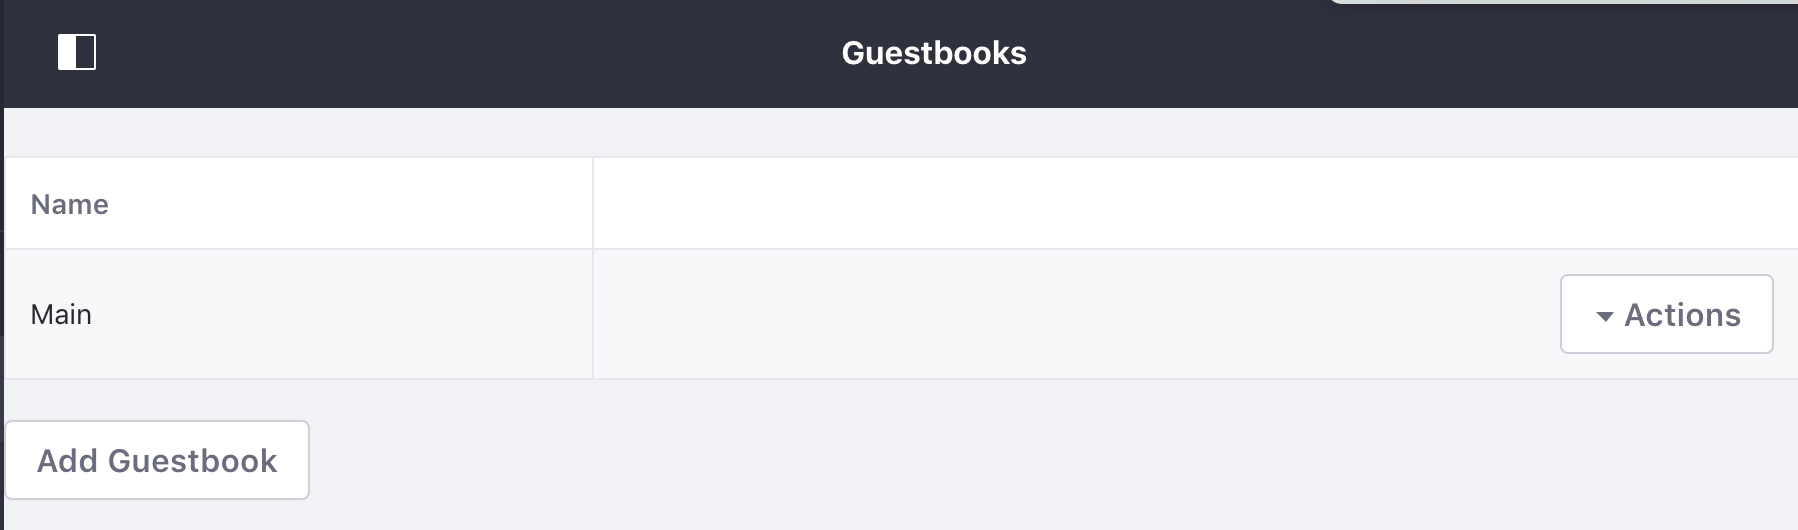 Figure 1: The Guestbook Admin portlet lets administrators manage Guestbooks.